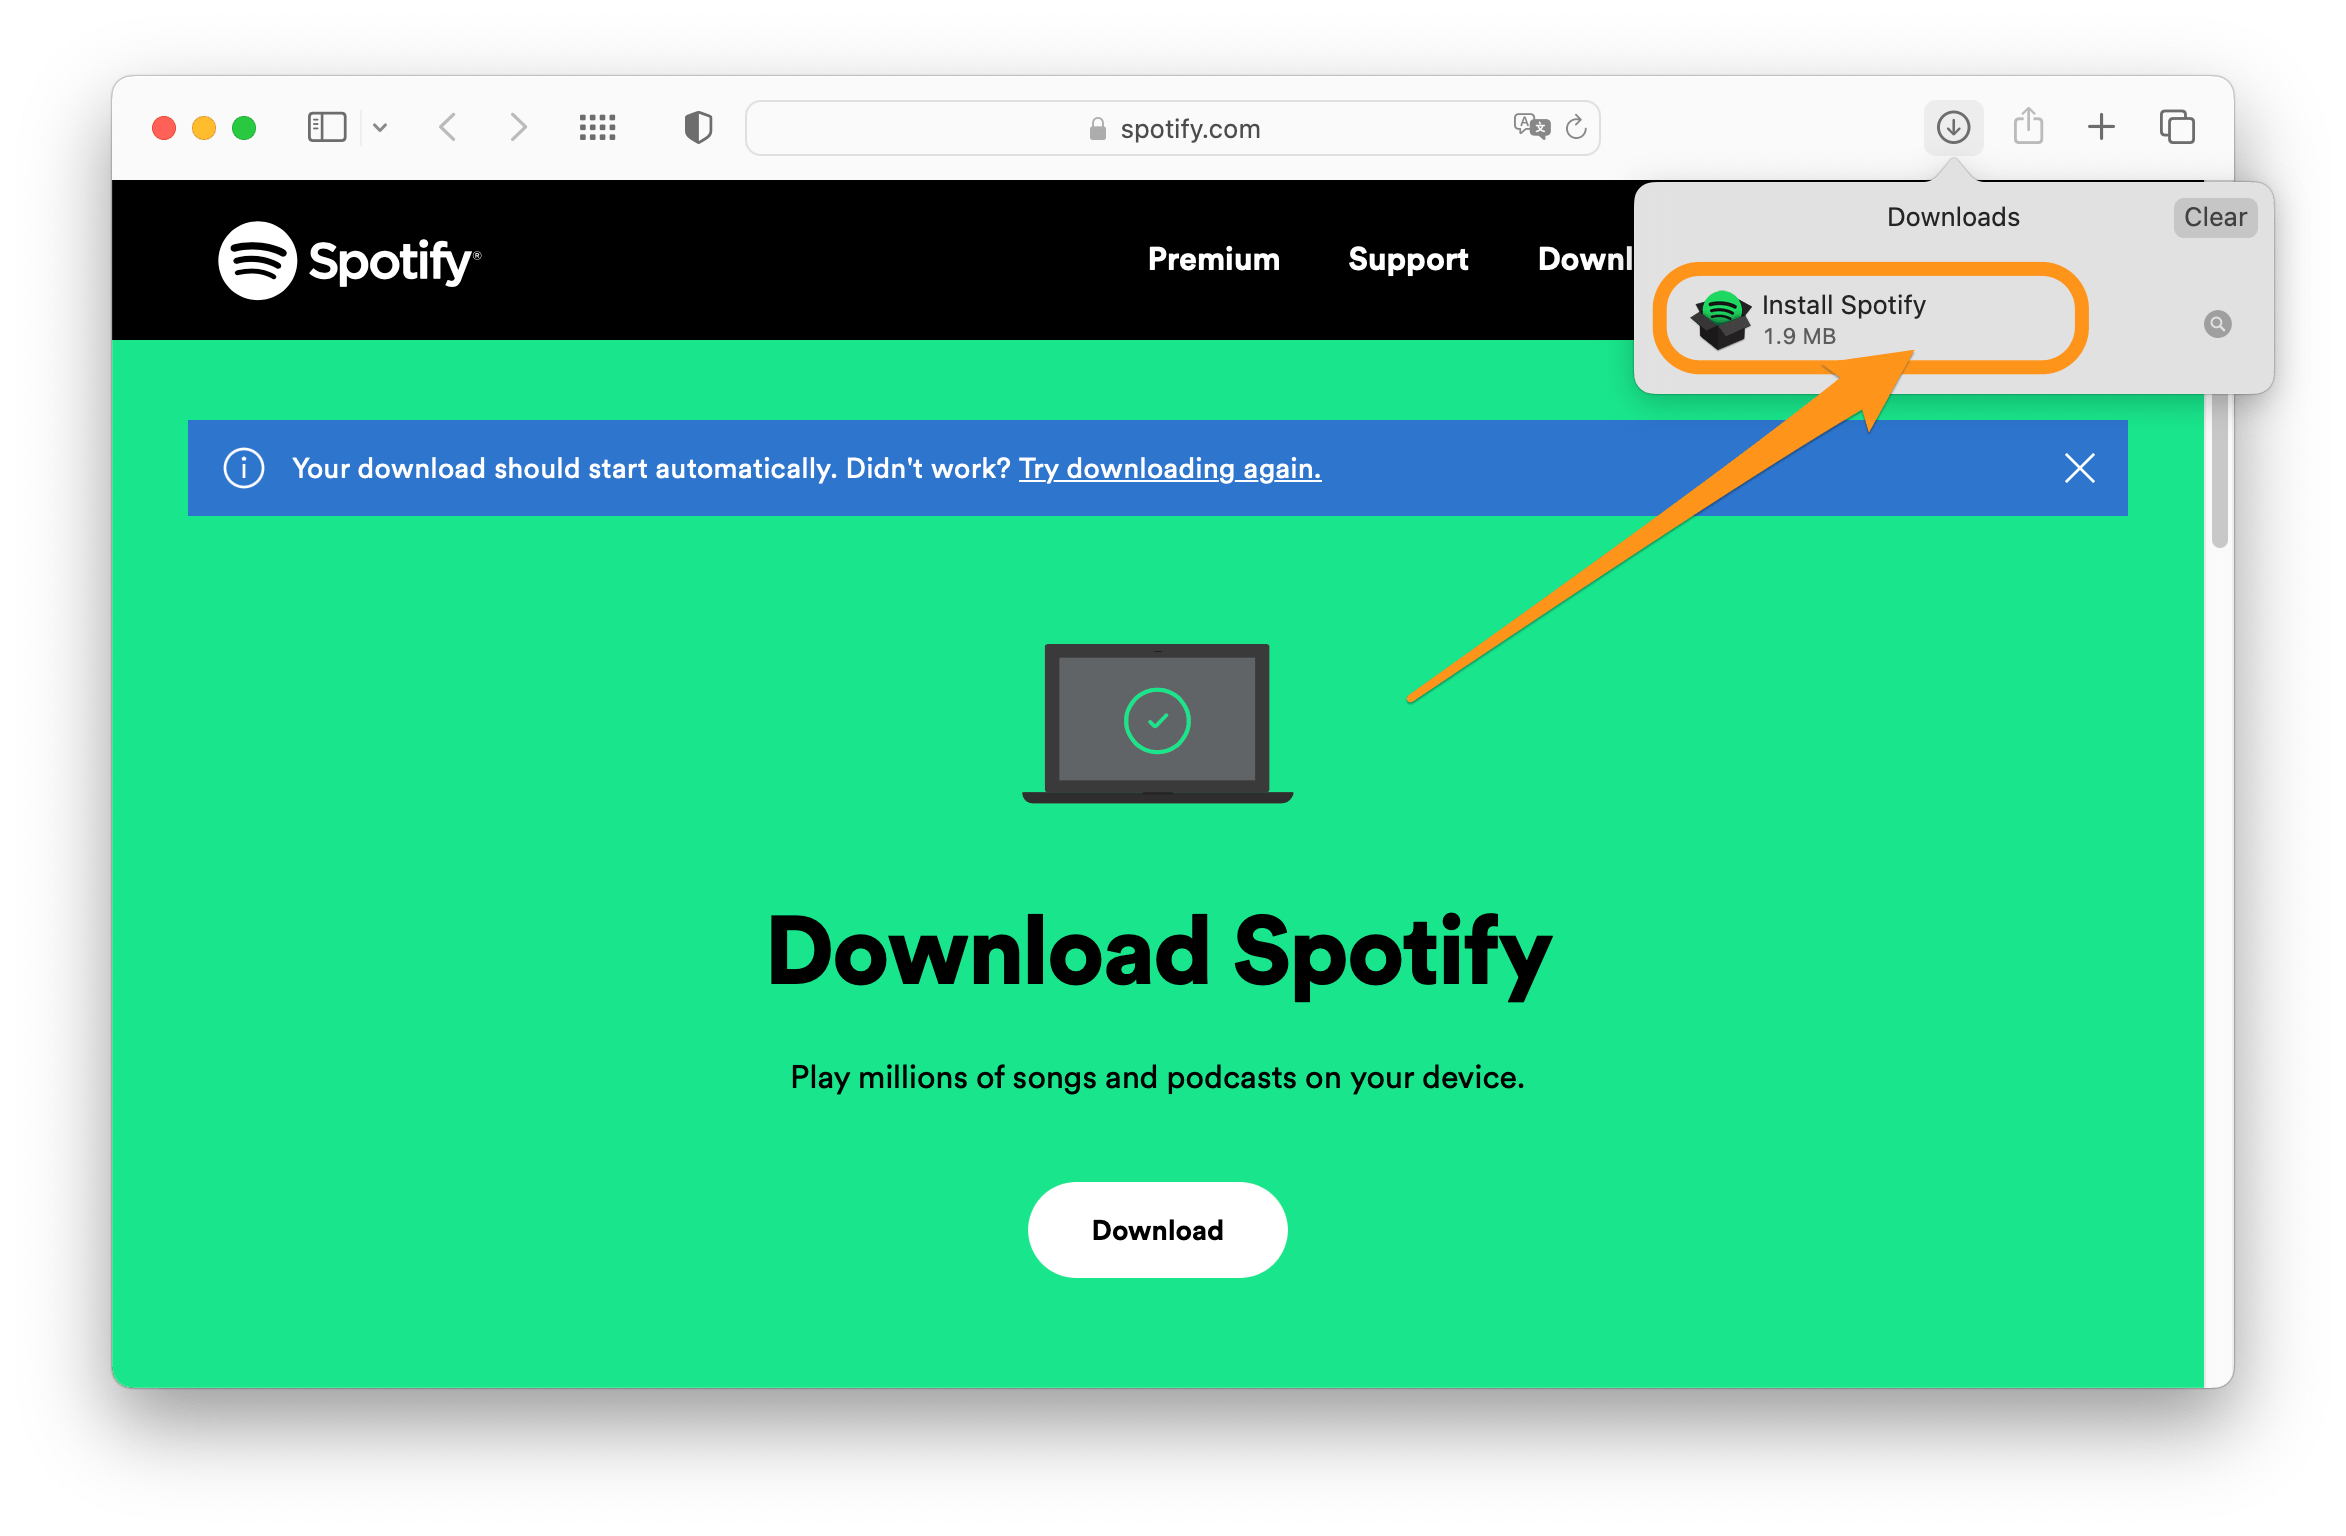 install Spotify package